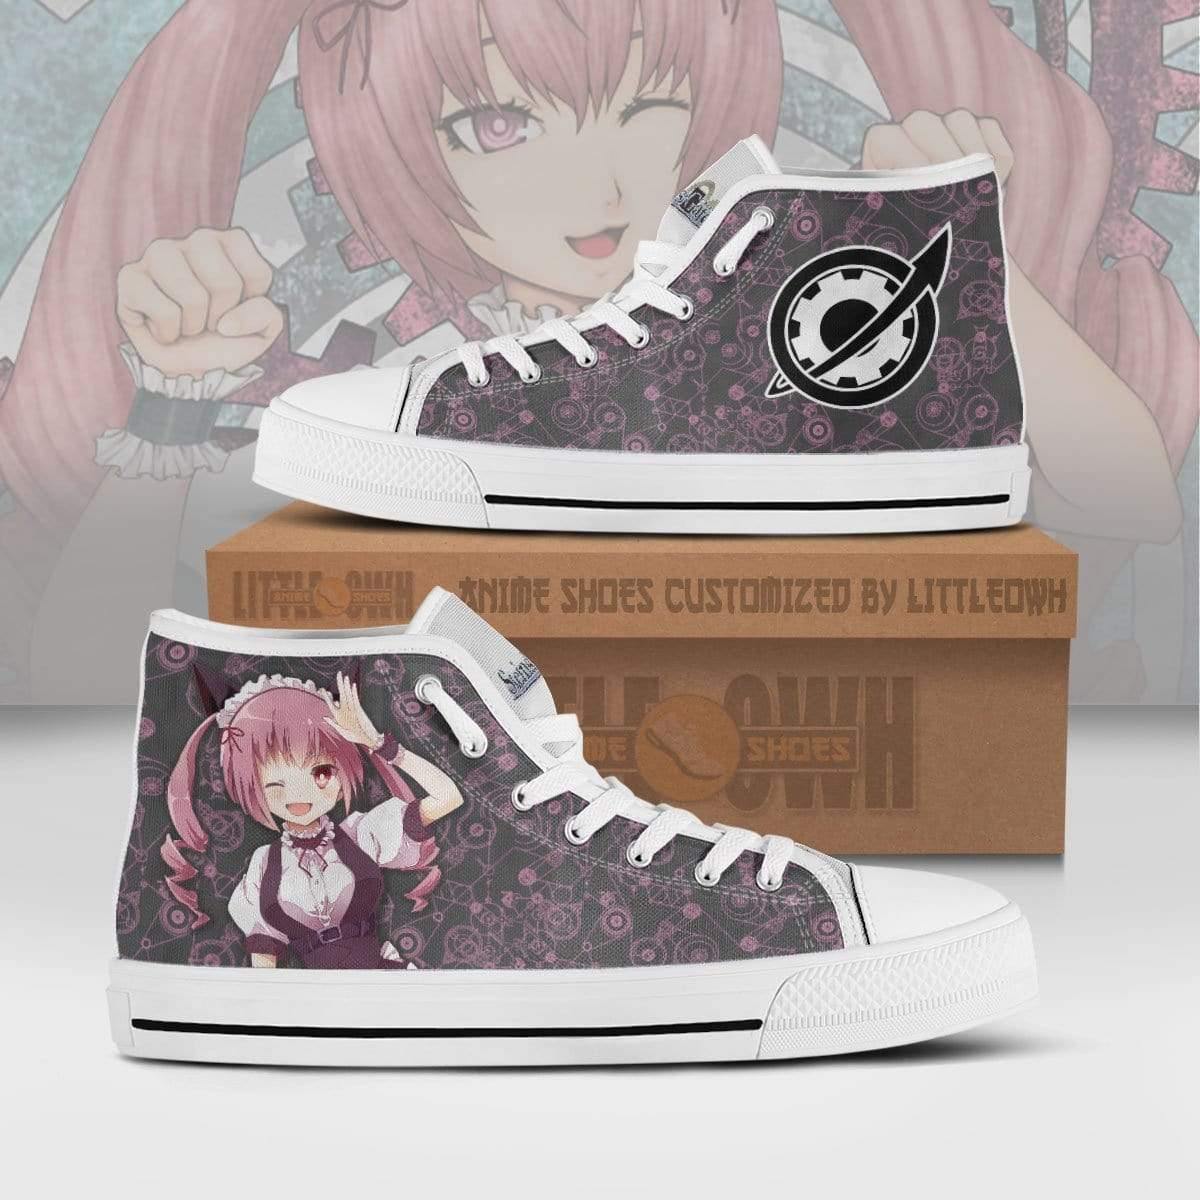 Faris NyanNyan High Top Canvas Shoes Custom Steins;Gate Anime Sneakers